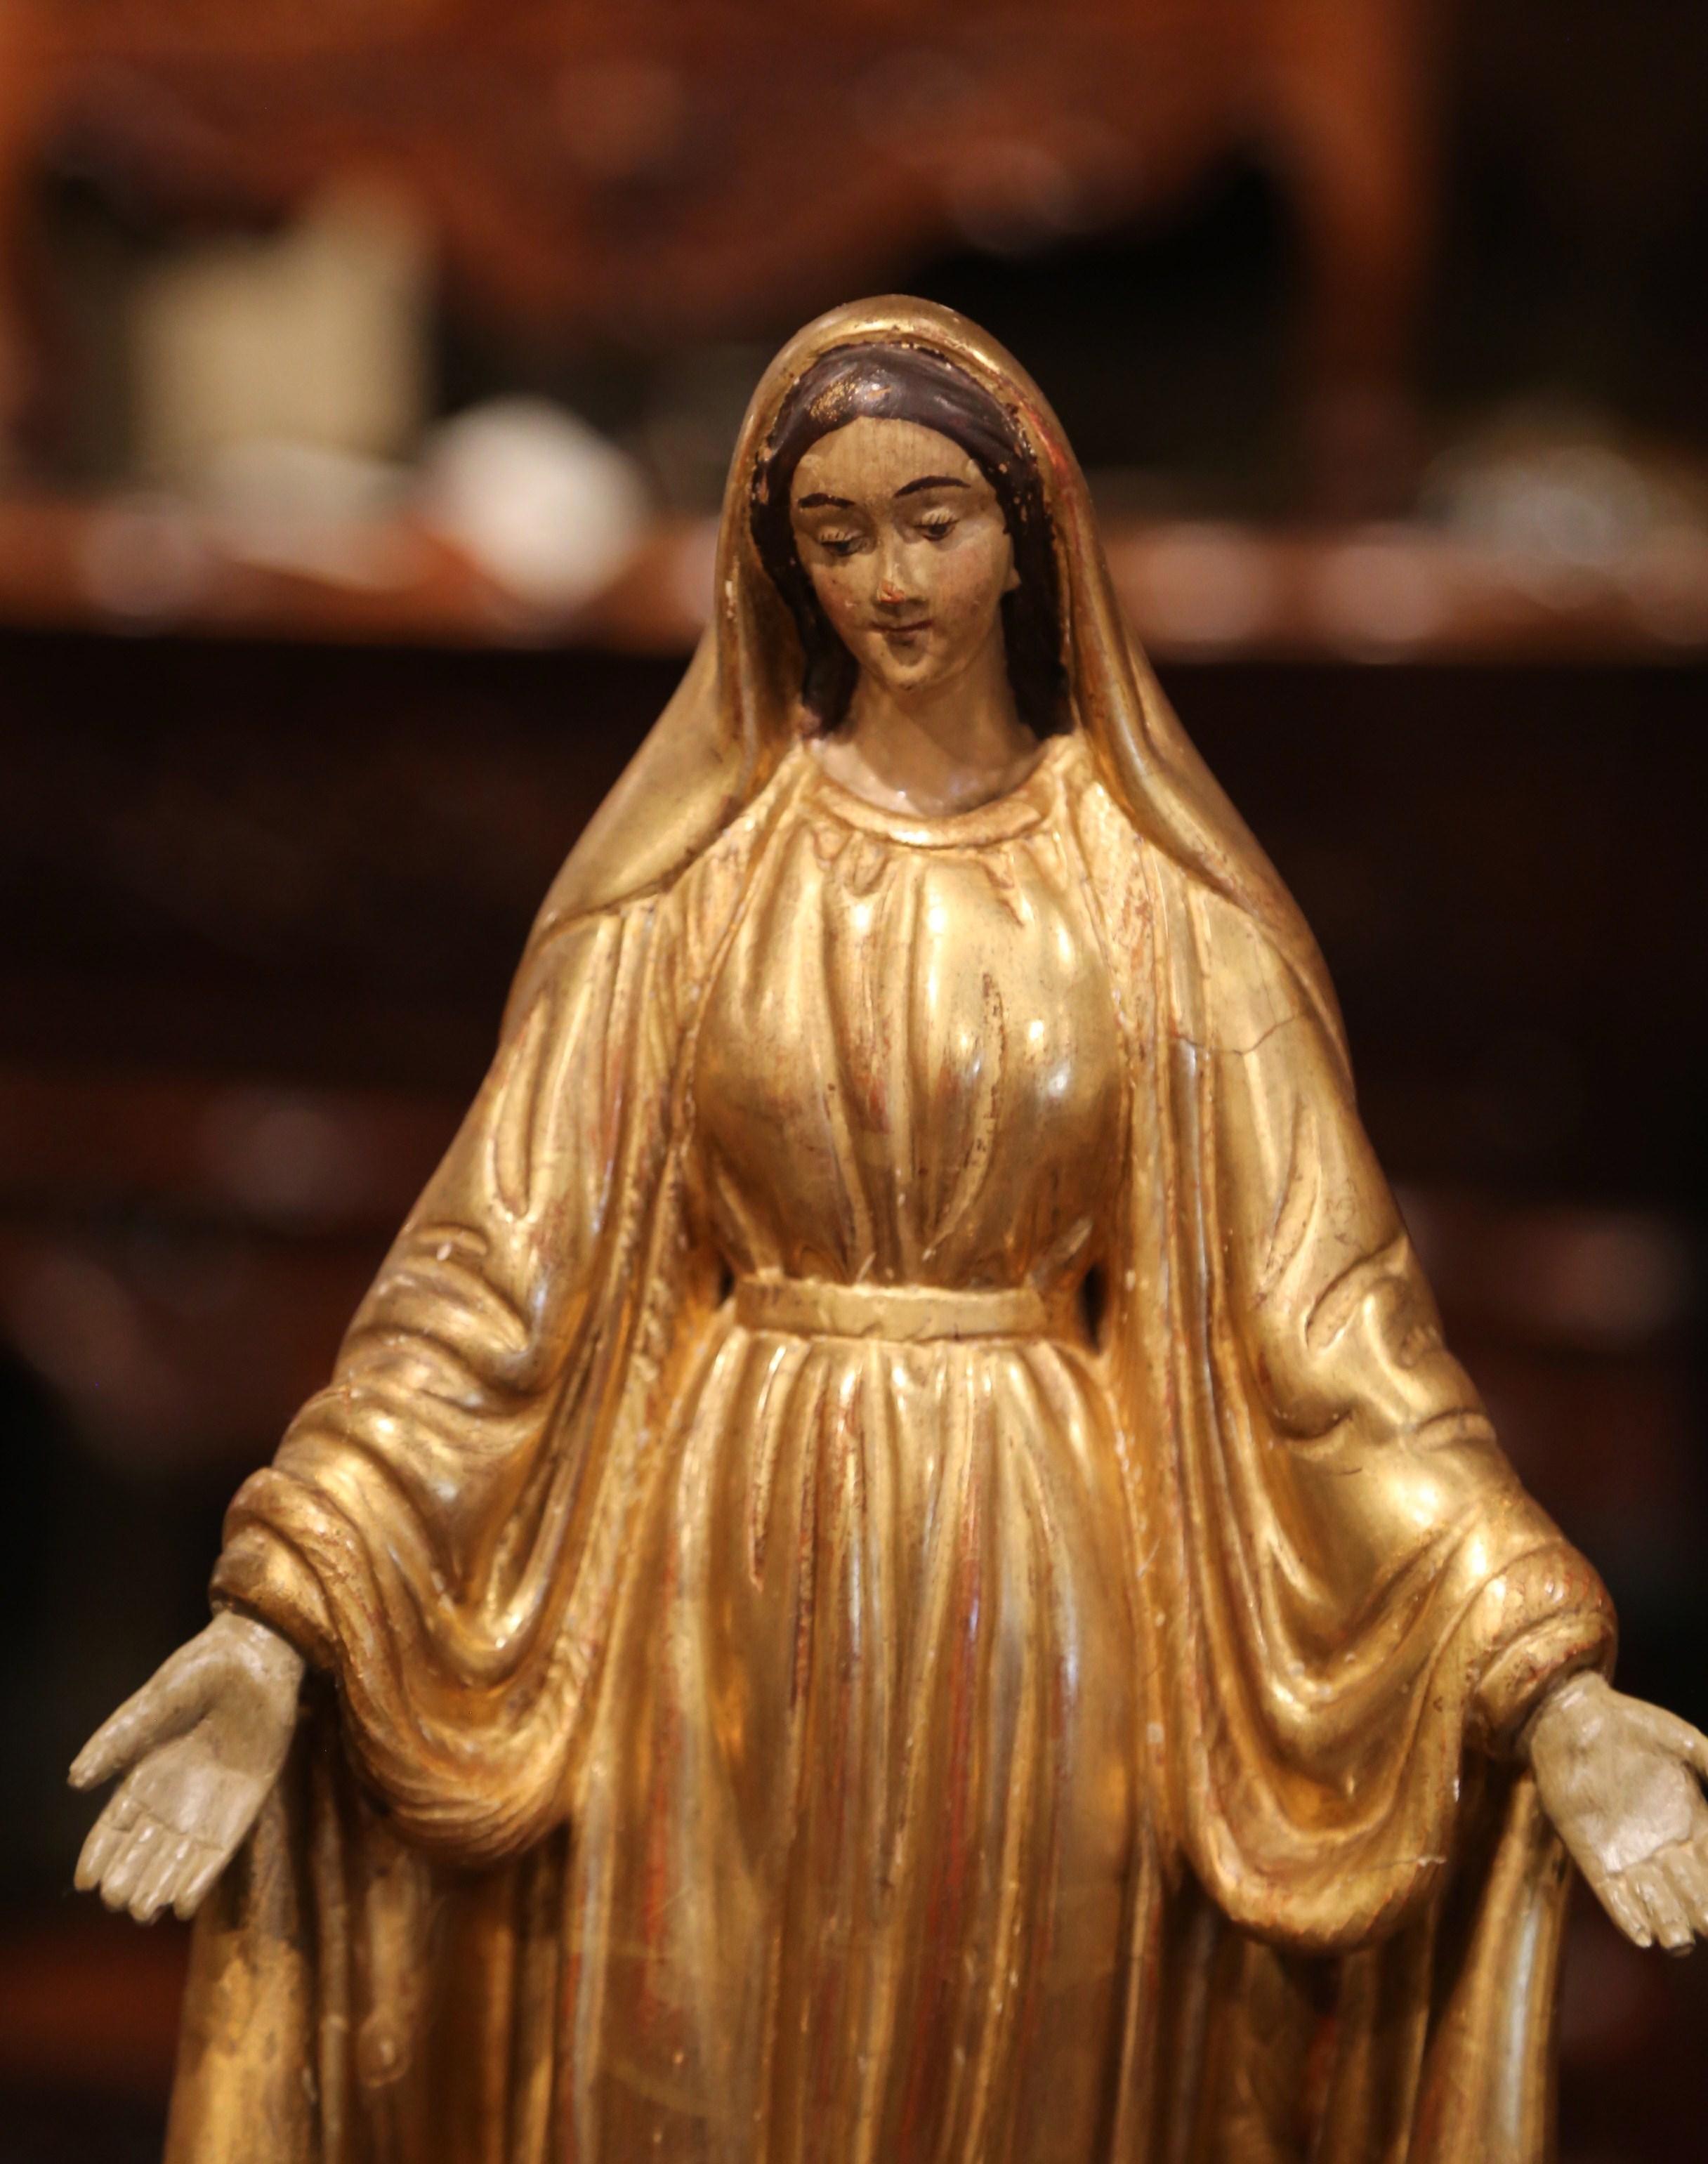 This beautiful, antique sculpture of the Virgin Mary in prayers was created in Provence, France, circa 1860. Embellished with gold leaf and polychrome finish, including discrete engraved floral motifs, the Classic religious figure is beautifully